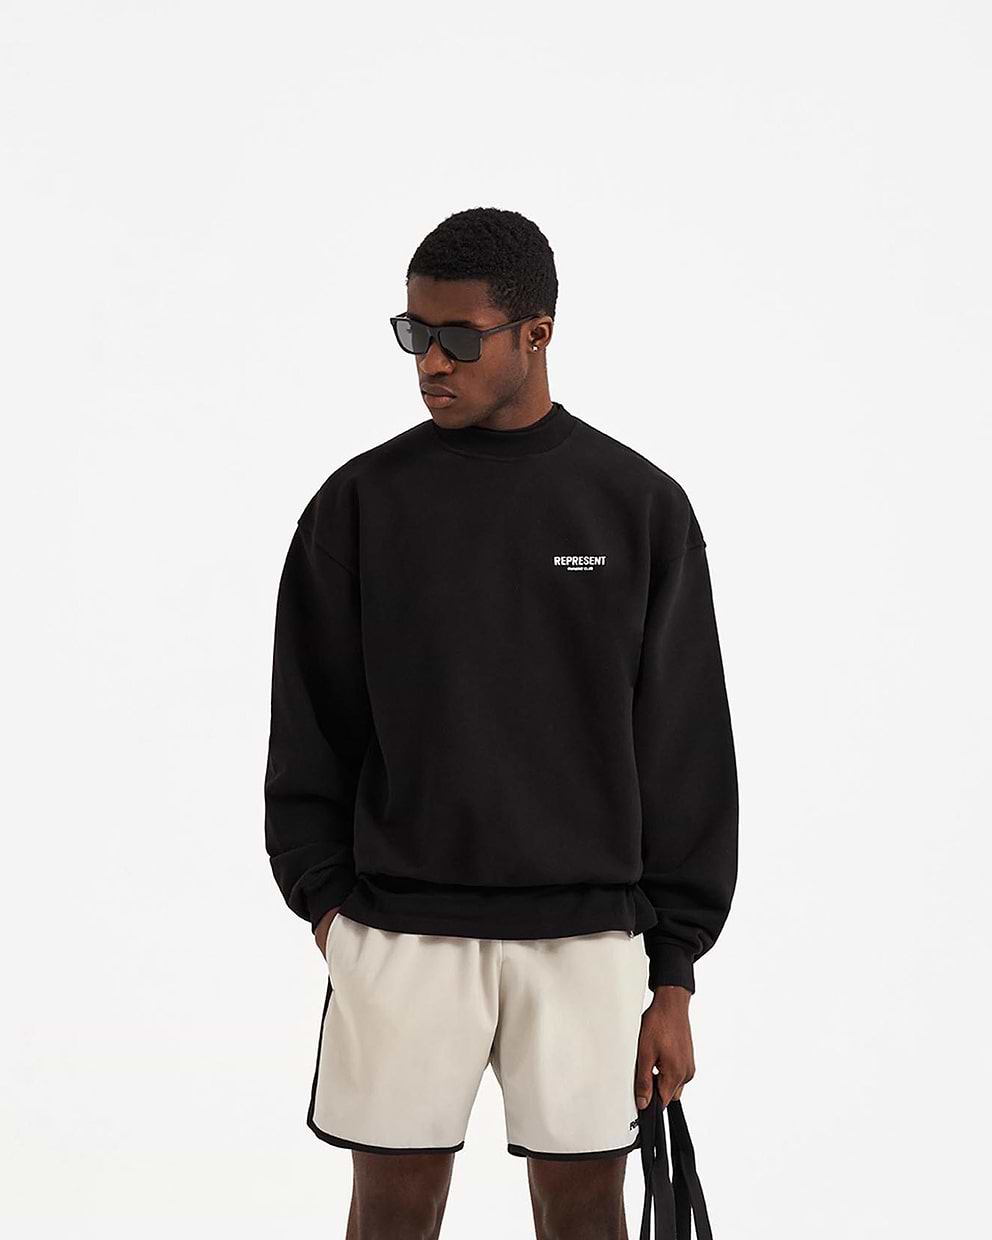 Represent Owners Club Sweater - Black